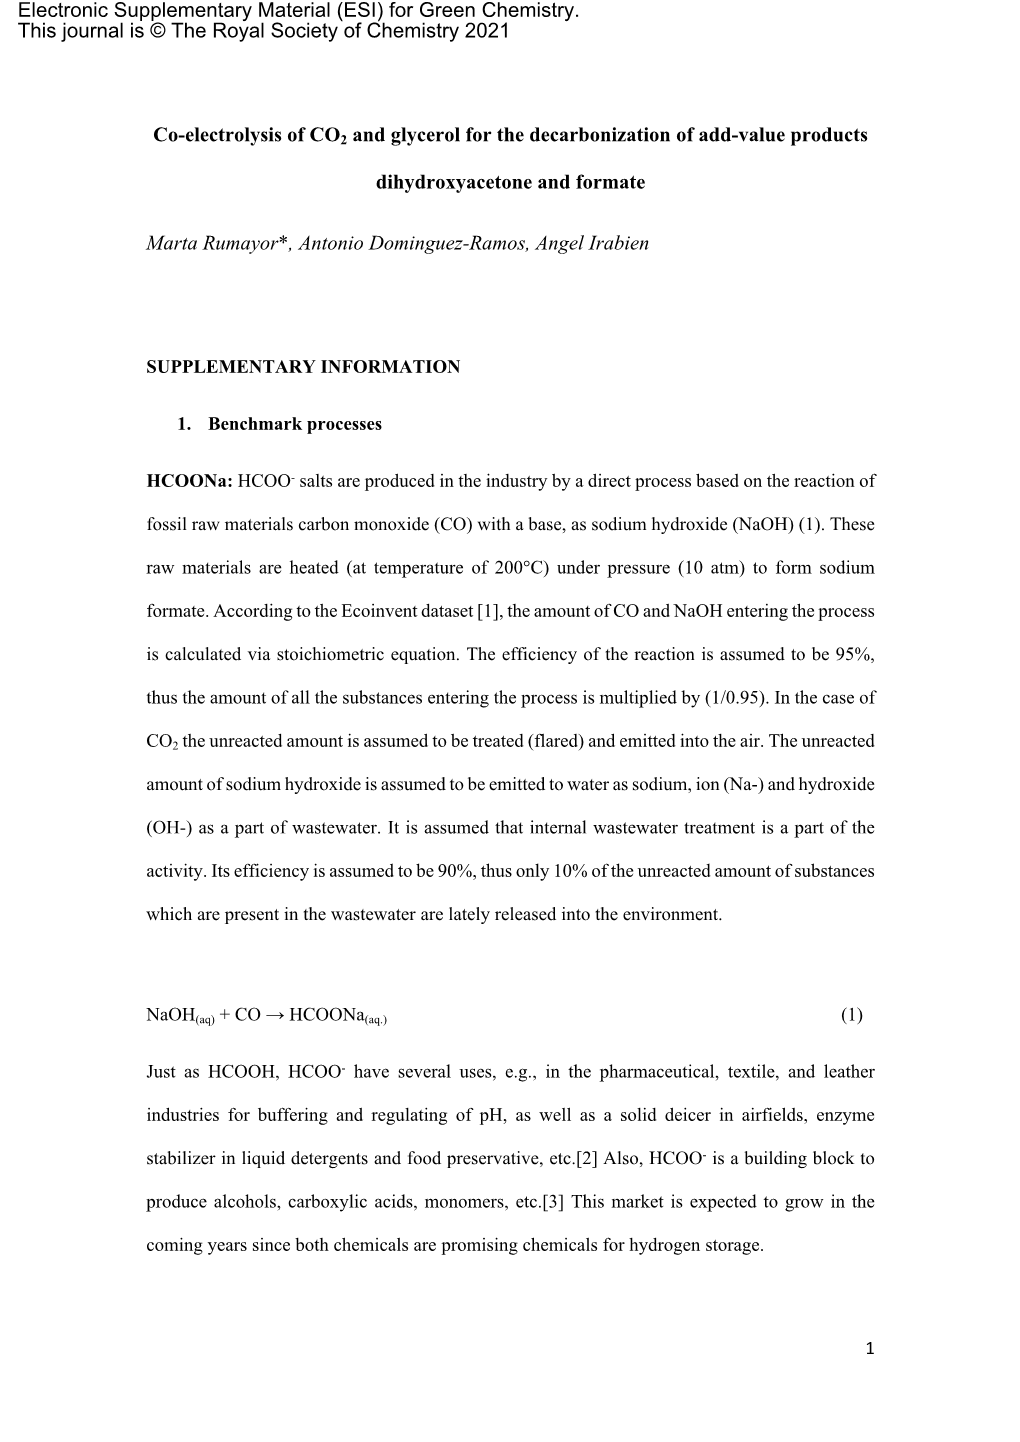 Co-Electrolysis of CO2 and Glycerol for the Decarbonization of Add-Value Products